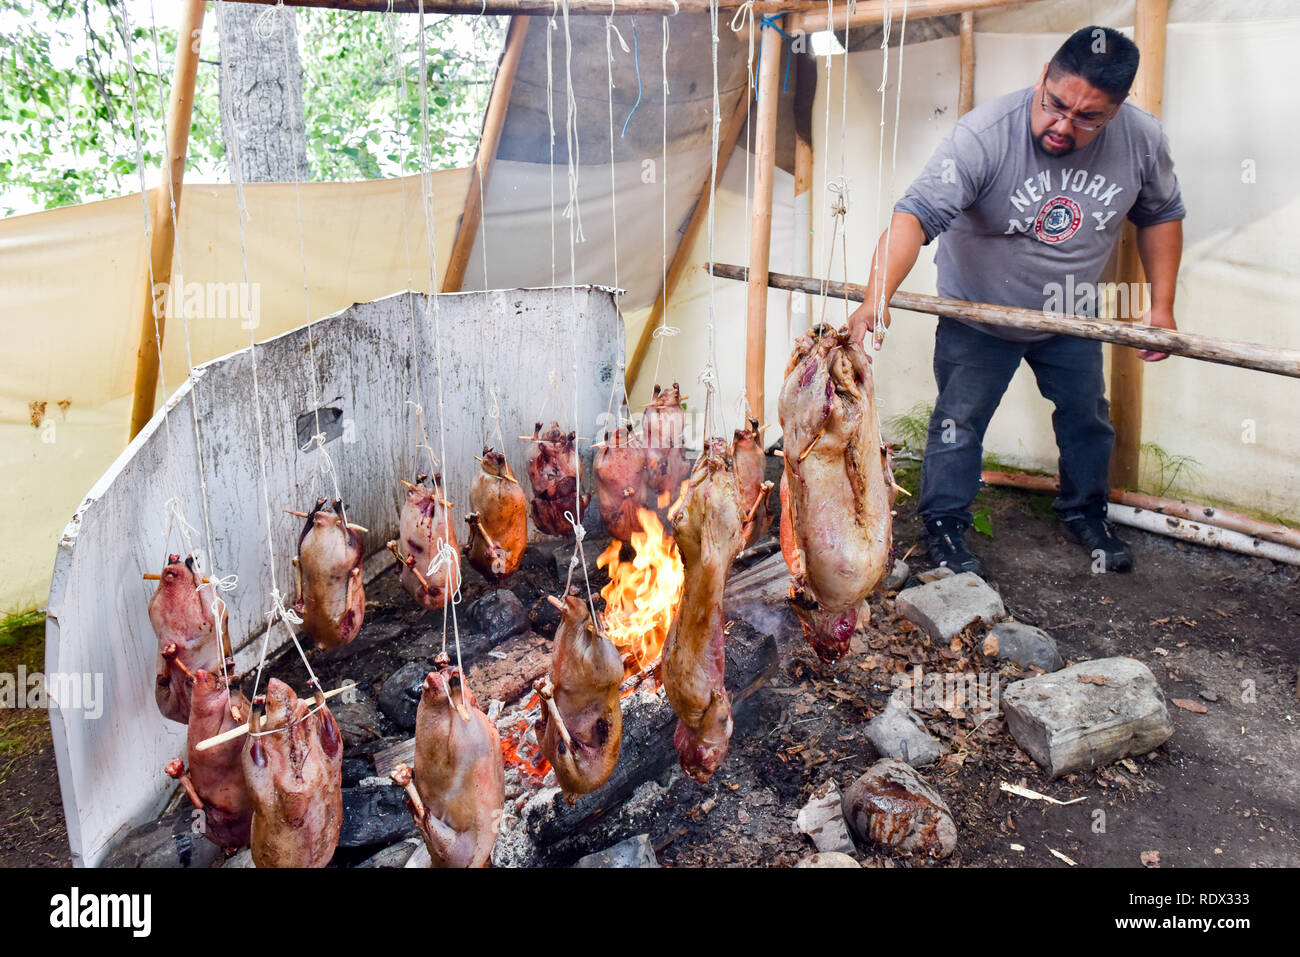 Indigenous man cooking wild meat over open fire, Northern Quebec, Canada Stock Photo